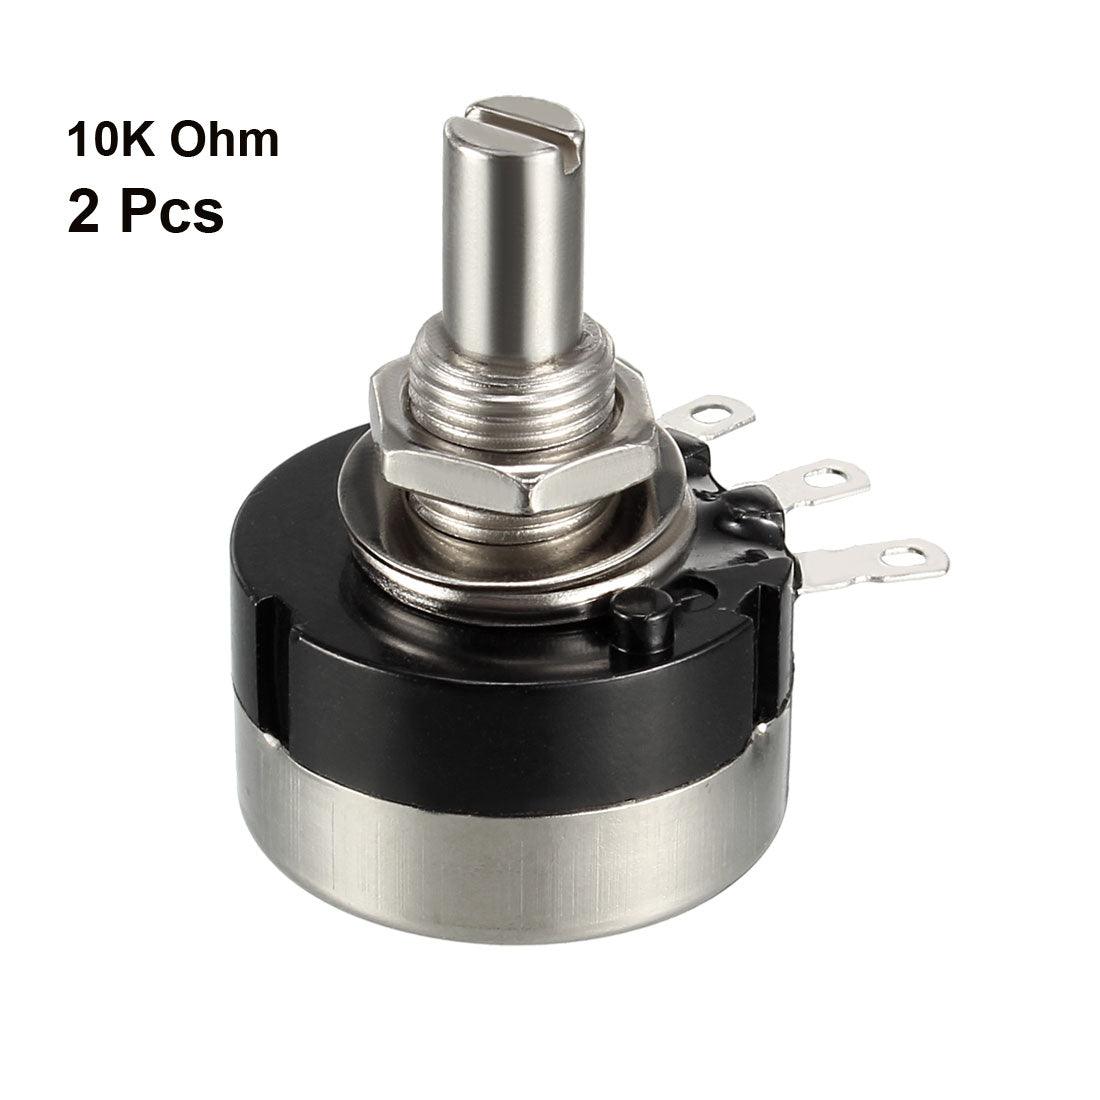 uxcell Uxcell RV24YN20S 10K Ohm Variable Resistors Single Turn Rotary Carbon Film Potentiometer 2pcs